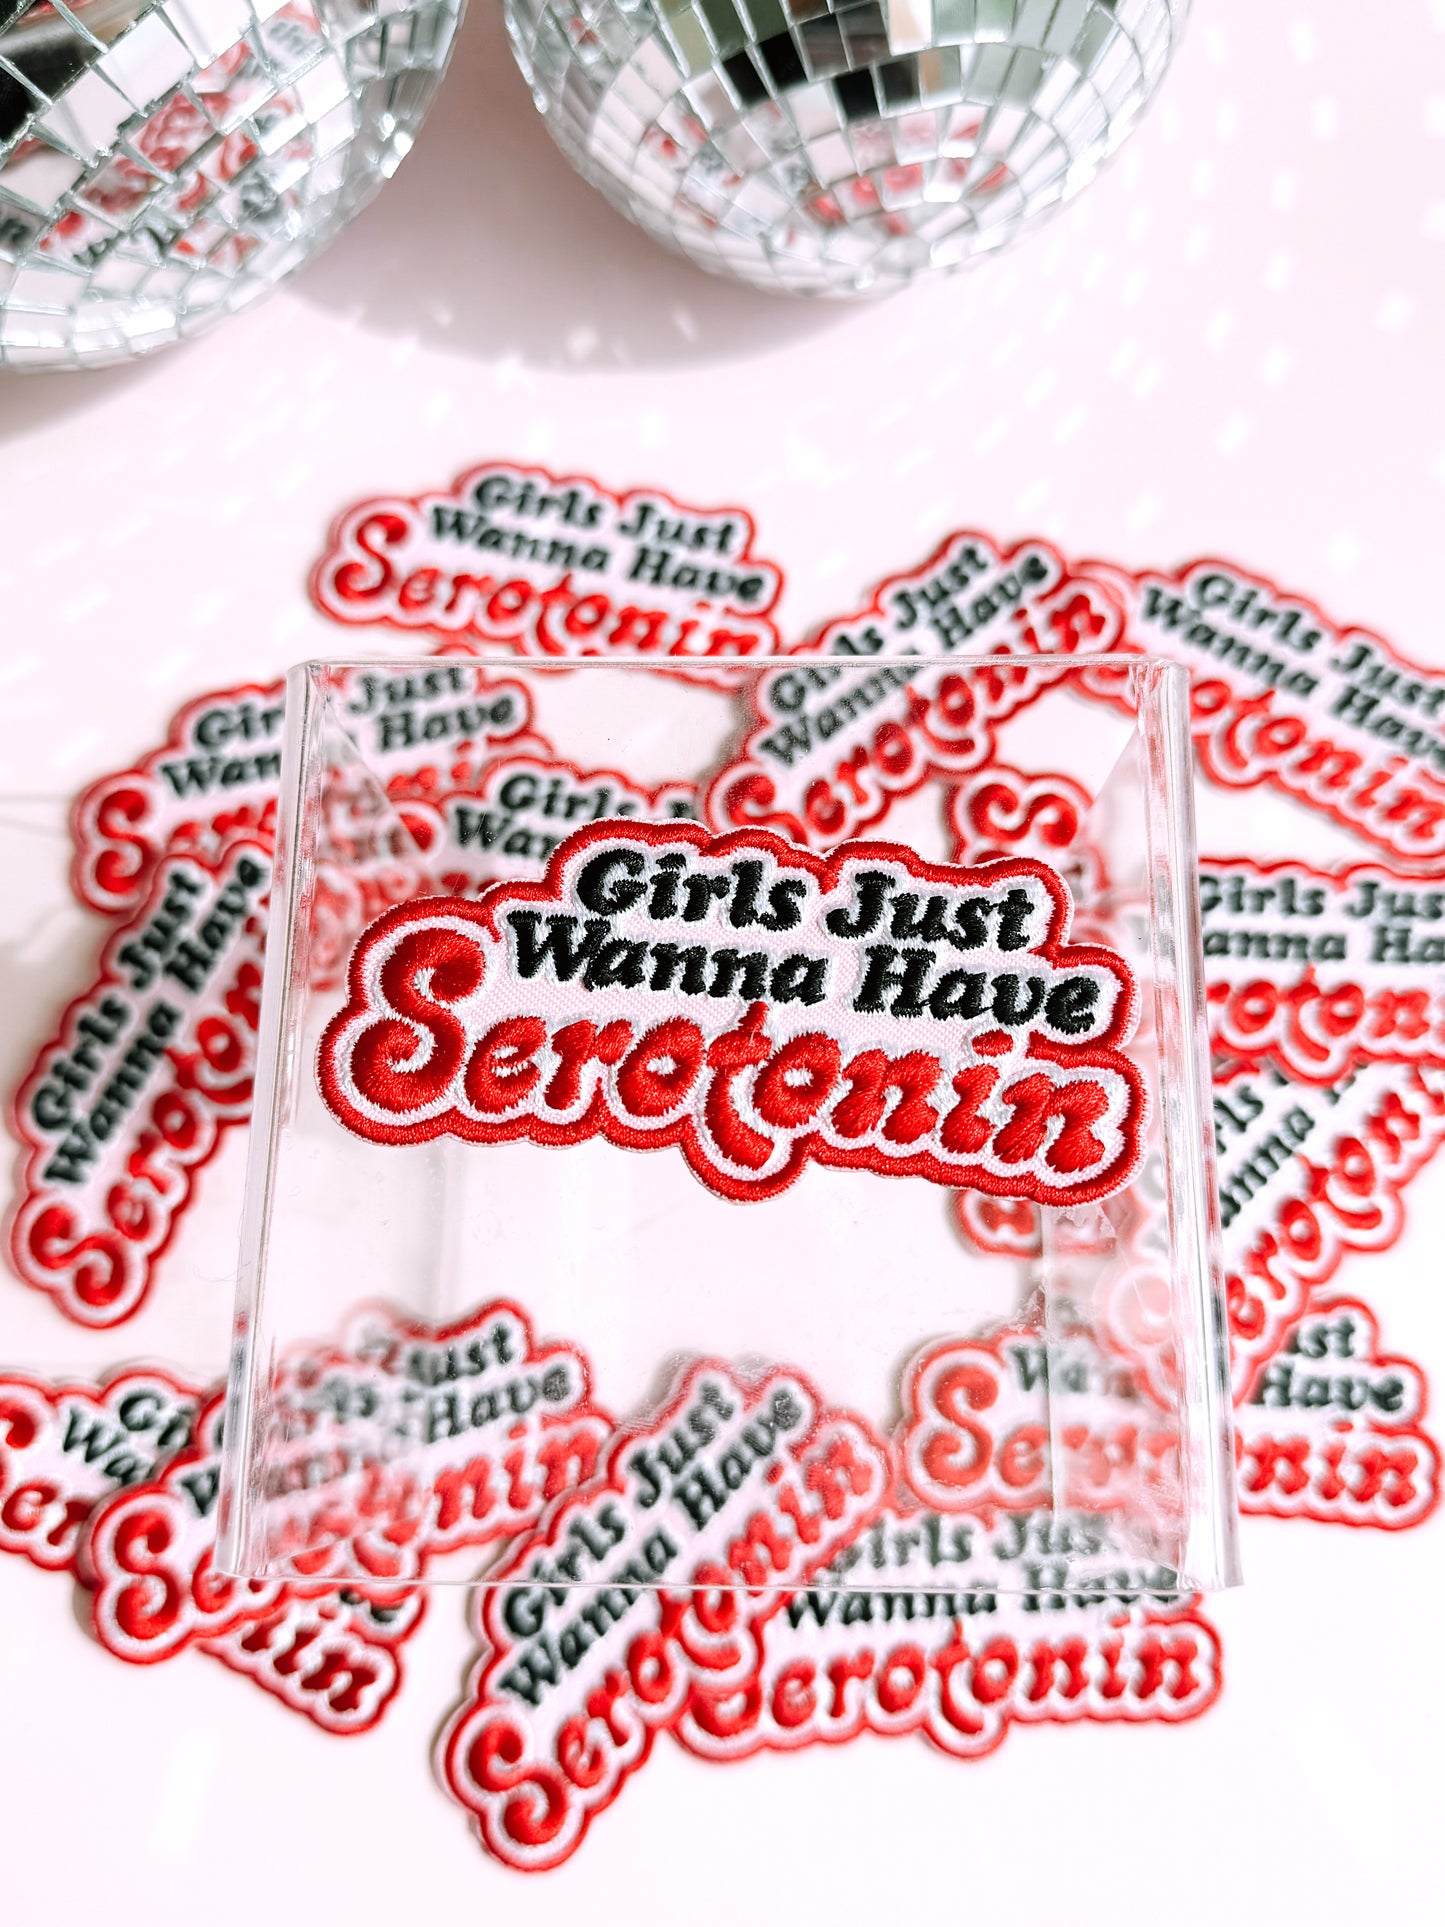 Girls Just Wanna Have Serotonin (Iron-On) Embroidered Patch